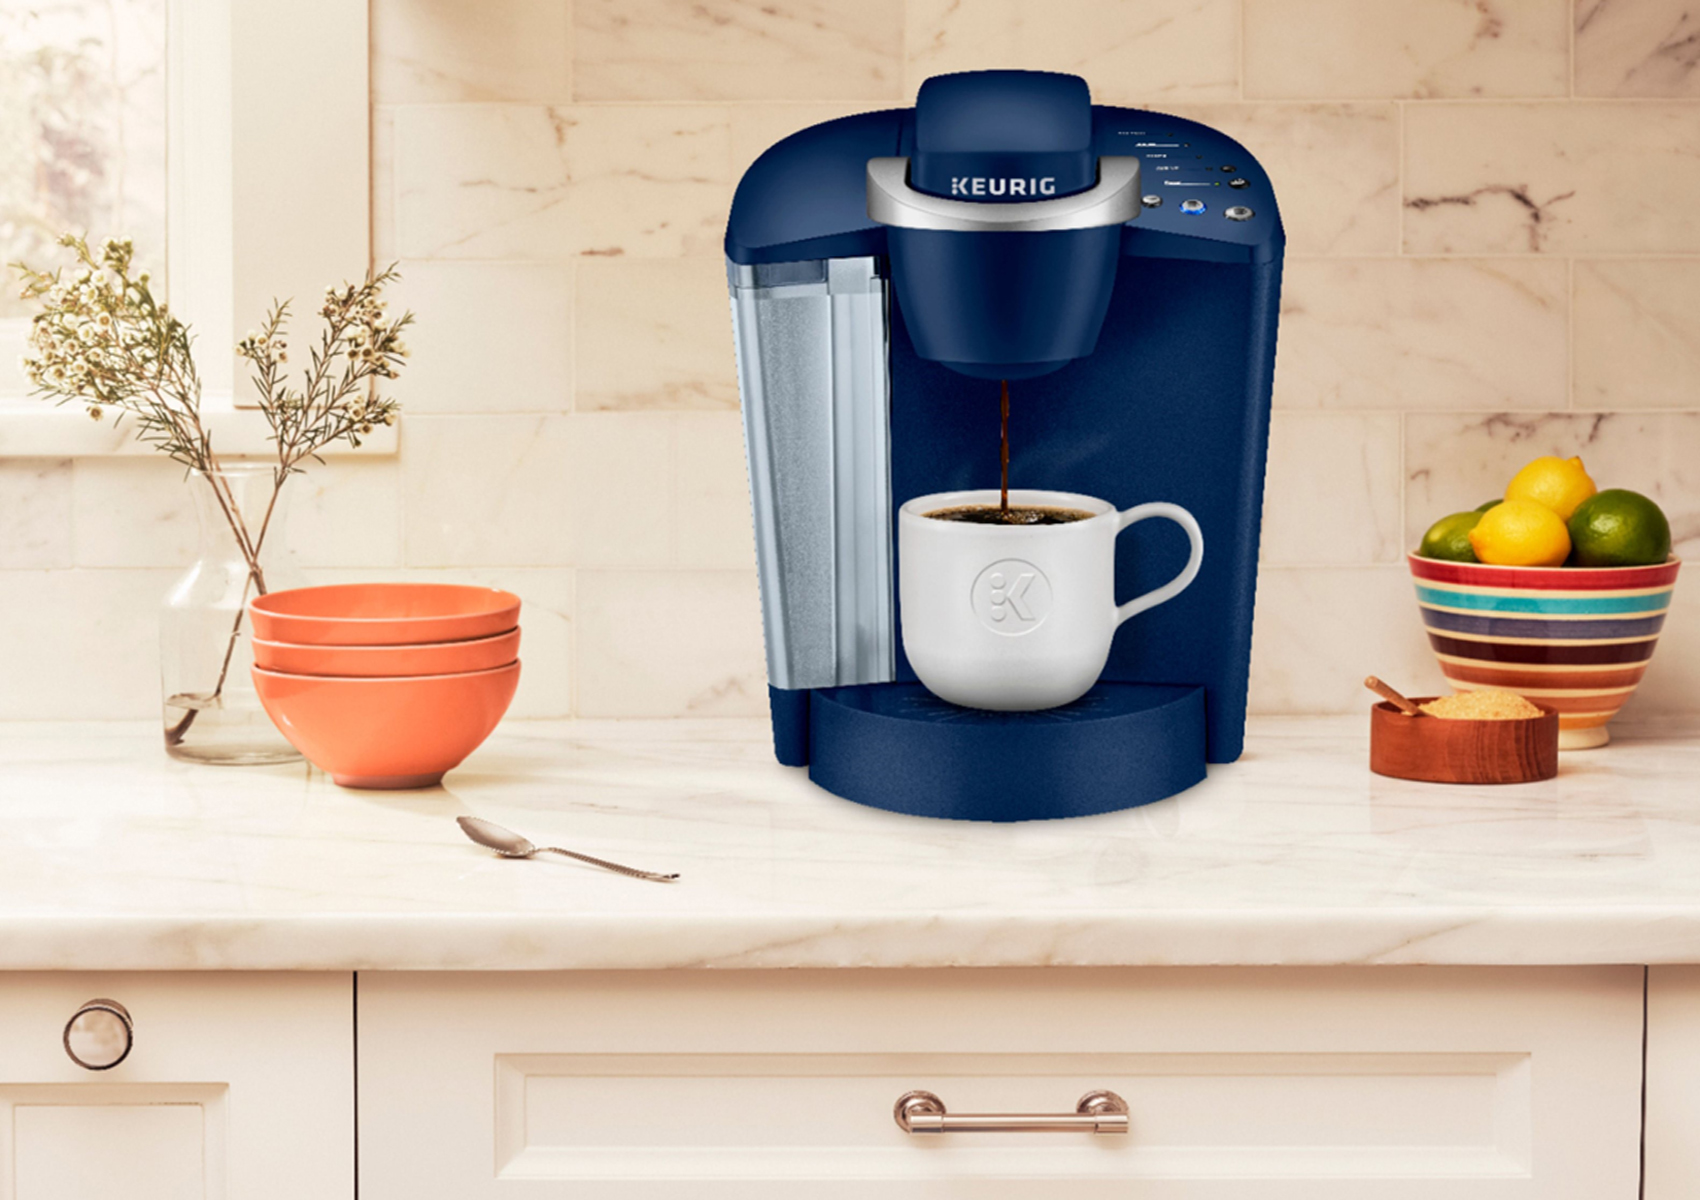 Black Friday  kitchen deals: Save on Keurig, Cuisinart, and more -  Reviewed